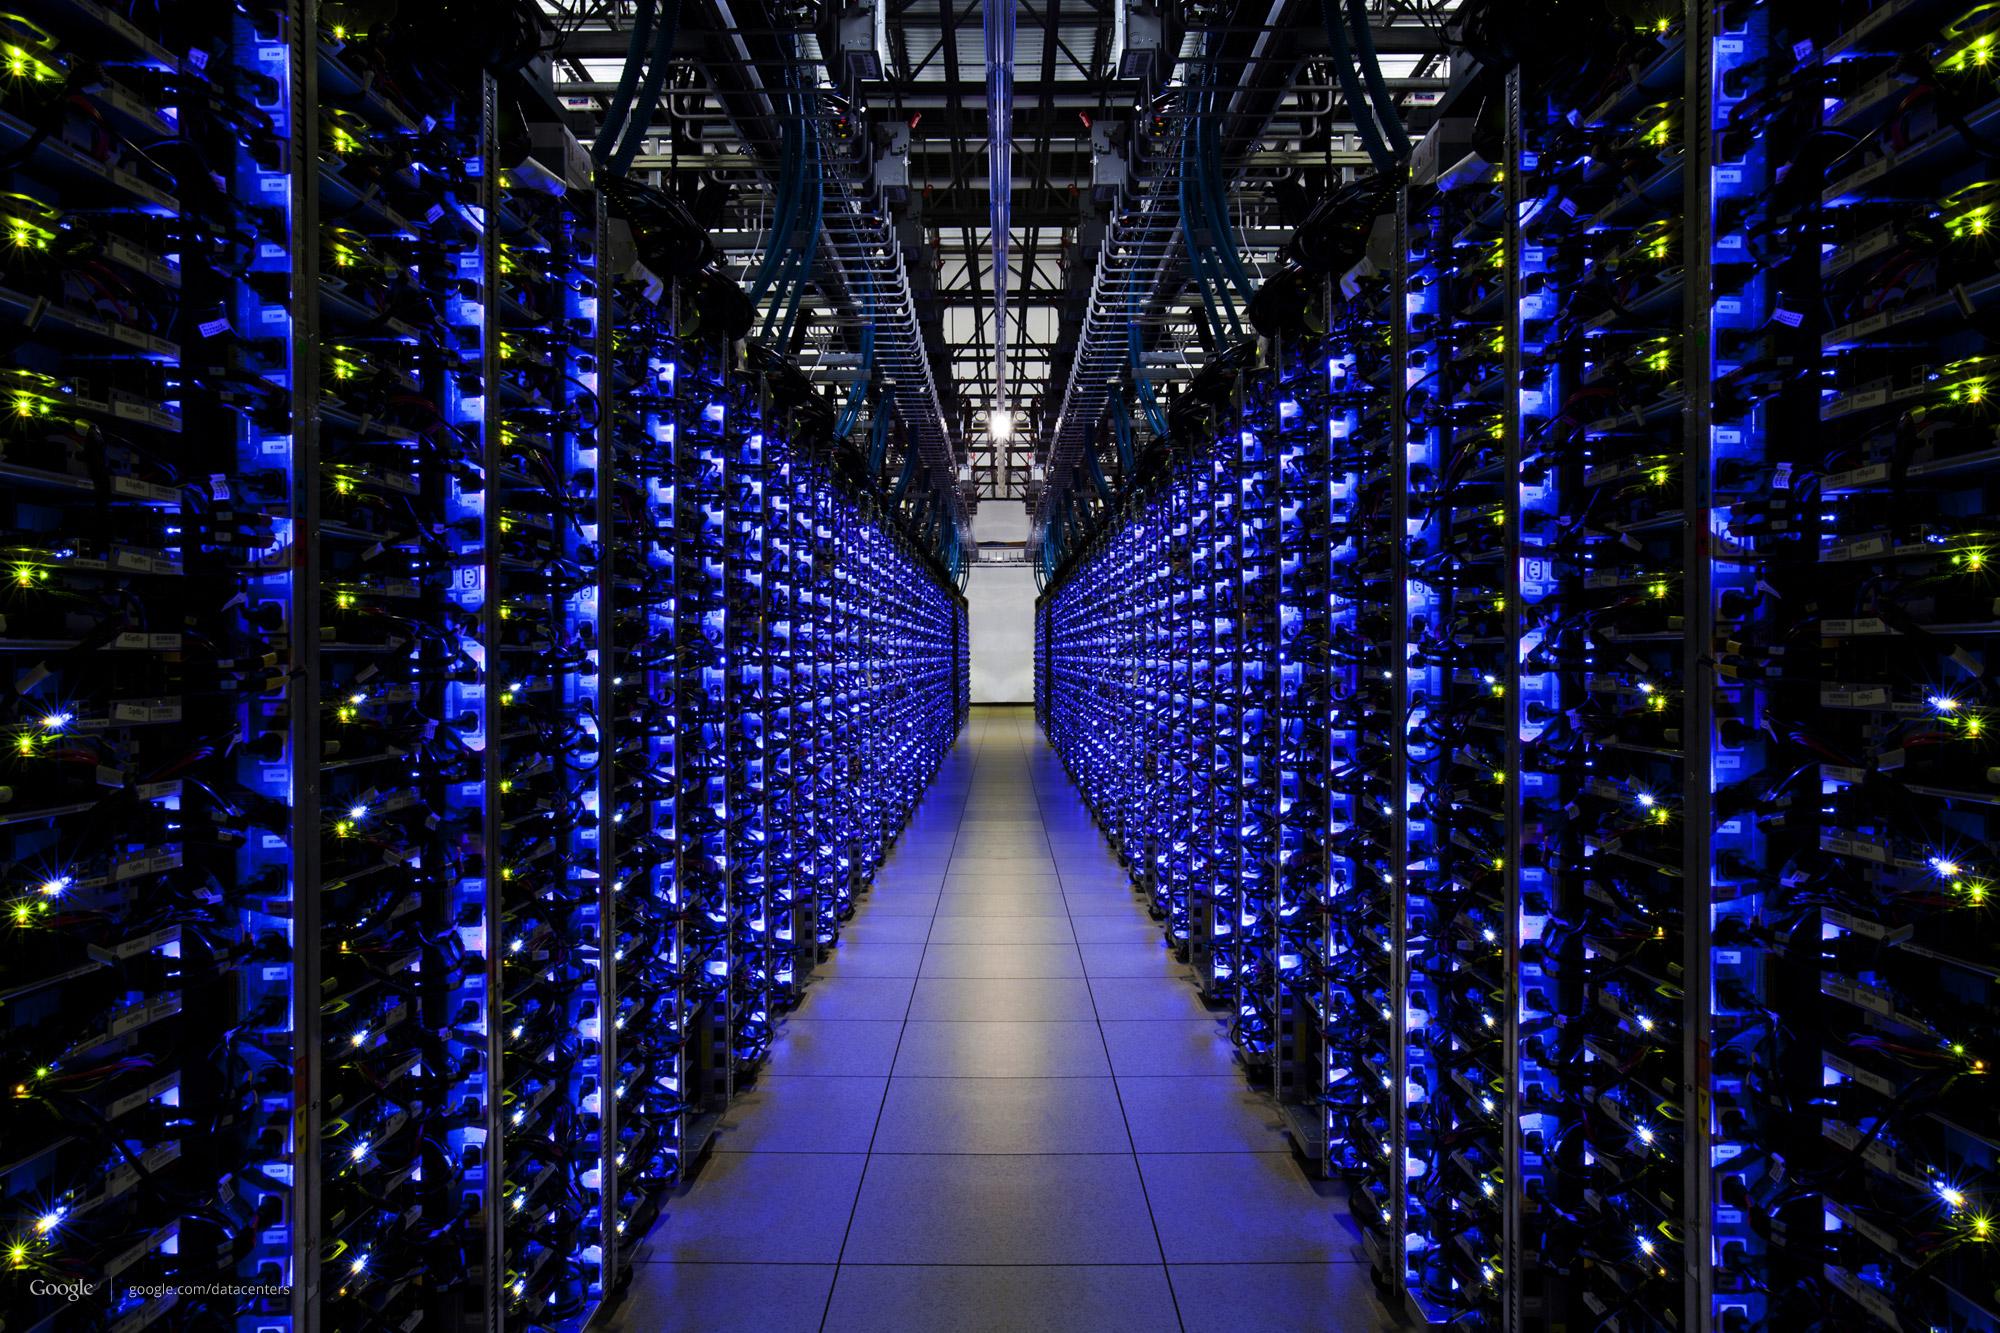 A Google-owned data center.